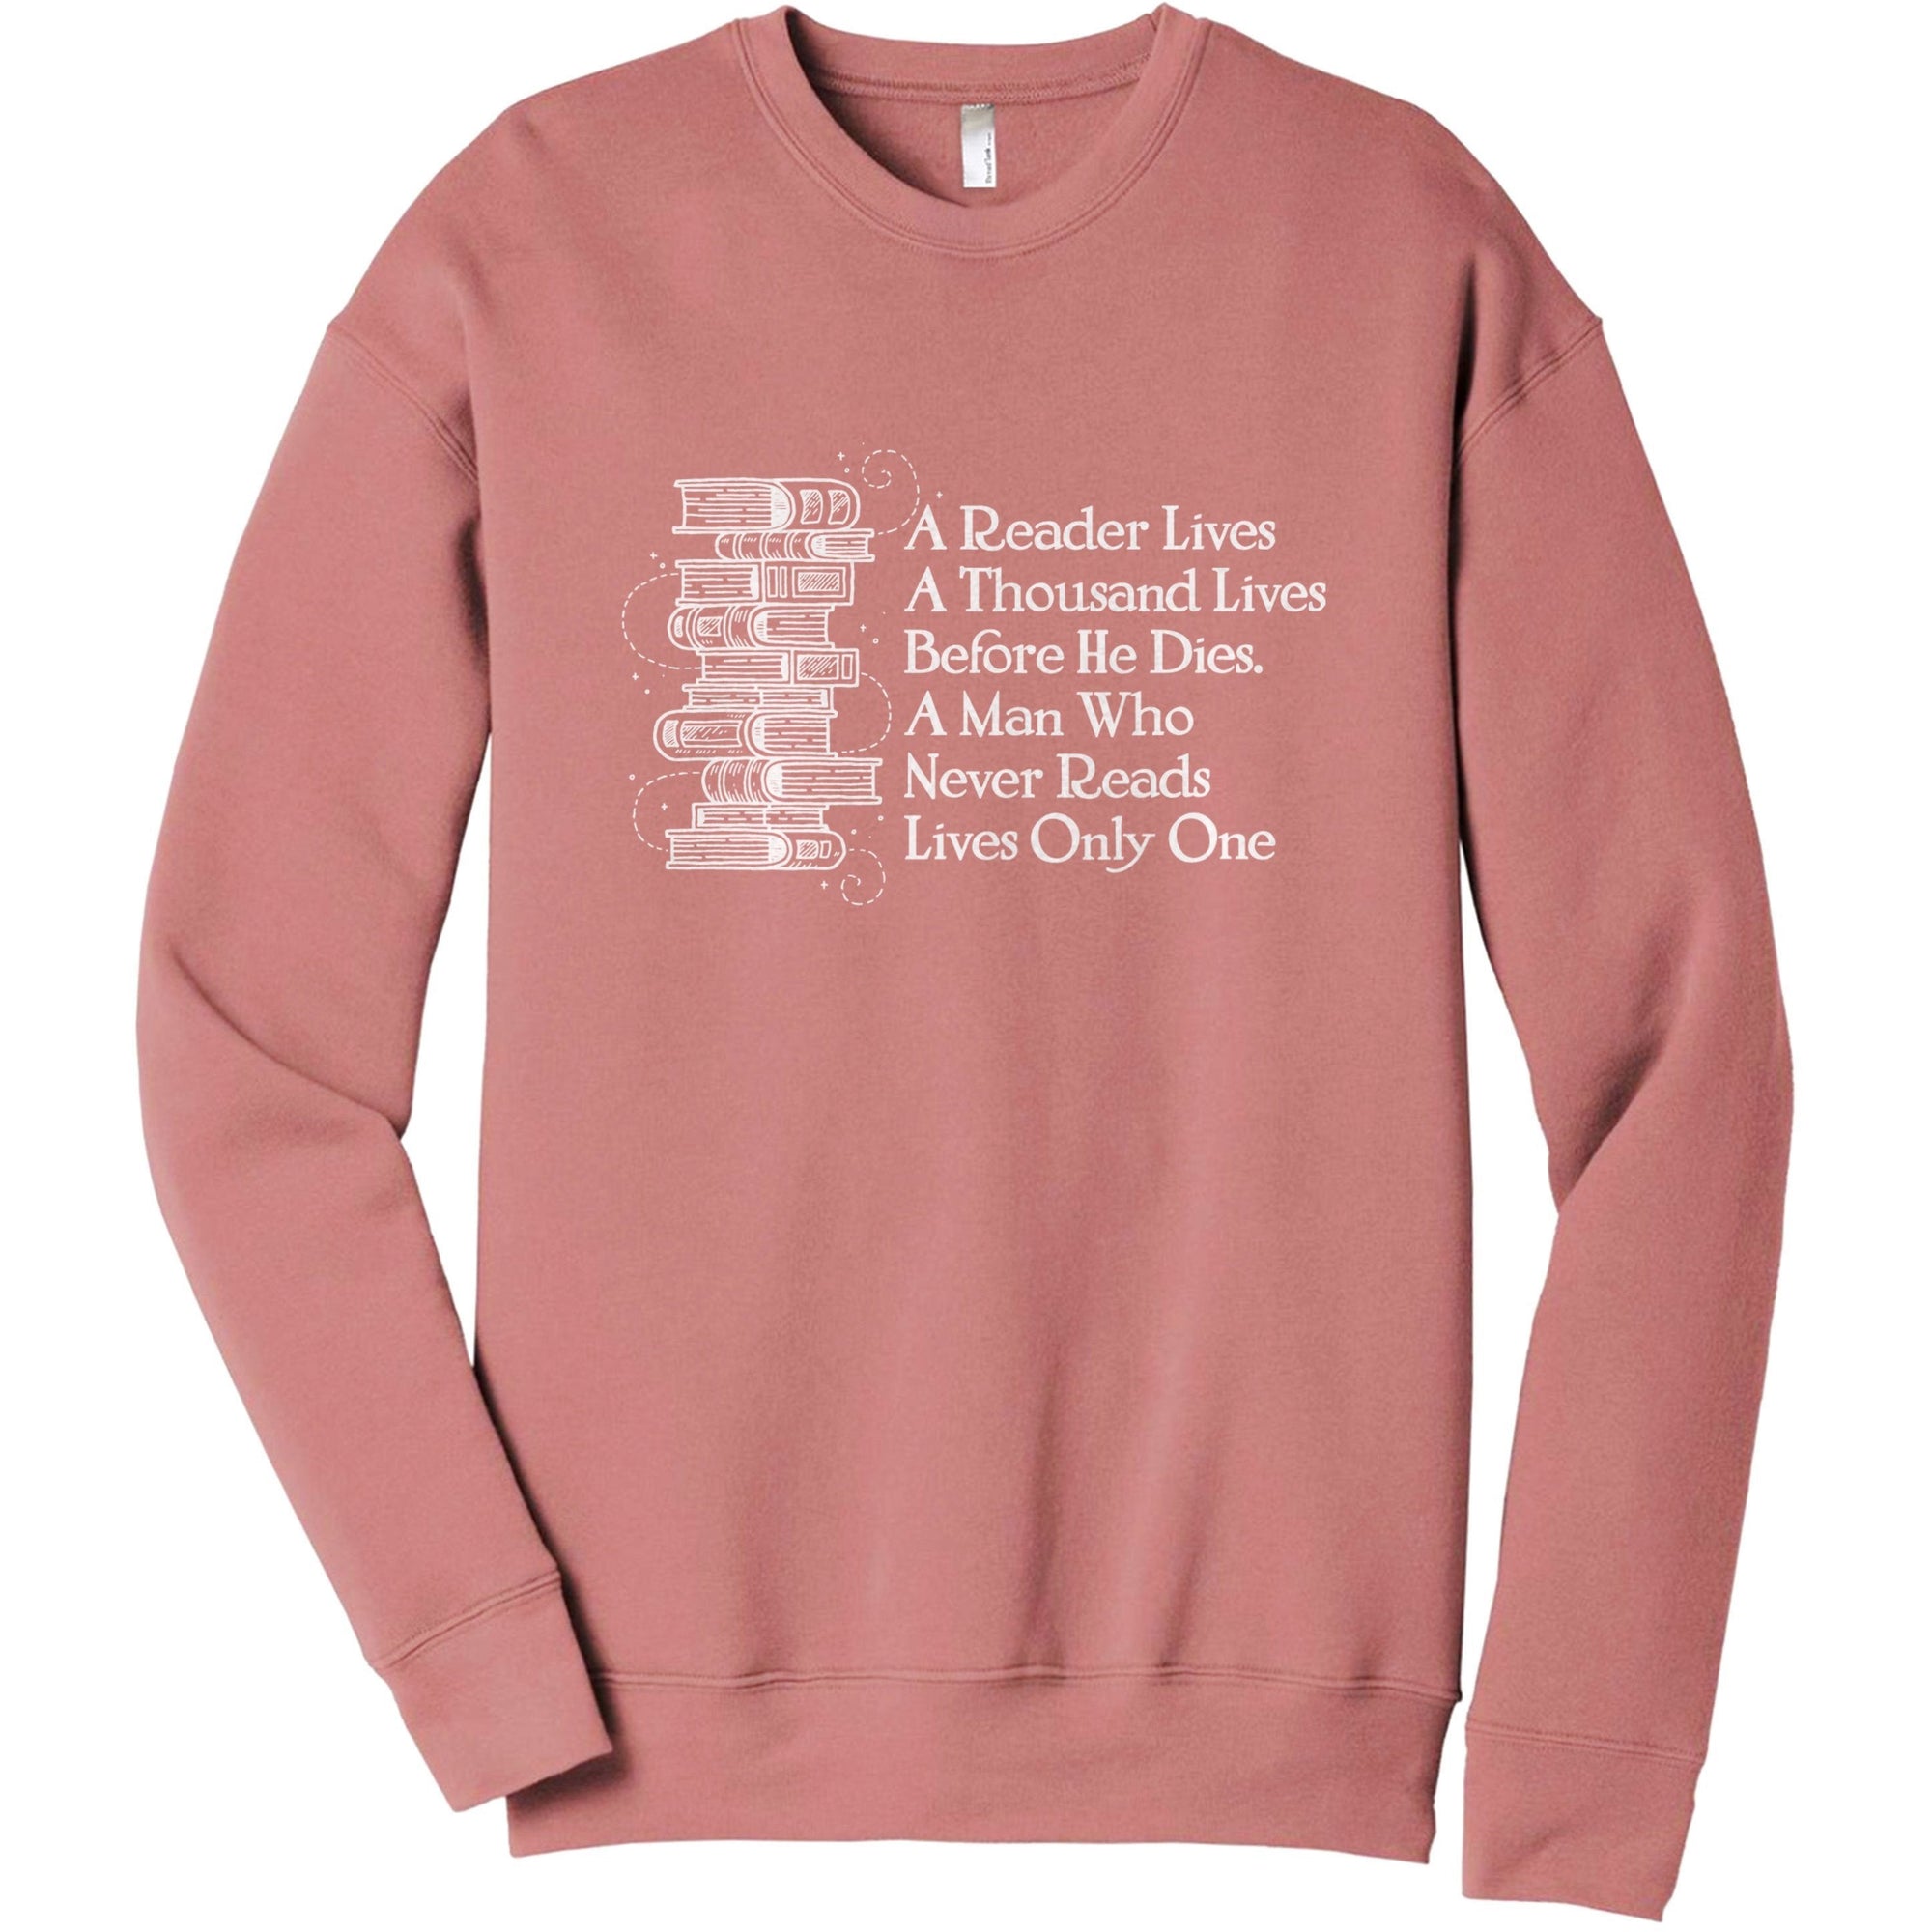 A Reader Lives A Thousand Lives Before He Dies. A Man Who Never Reads Lives Only One. (Reference: George R.R. Martin, A Dance With Dragons) - threadtank | stories you can wear